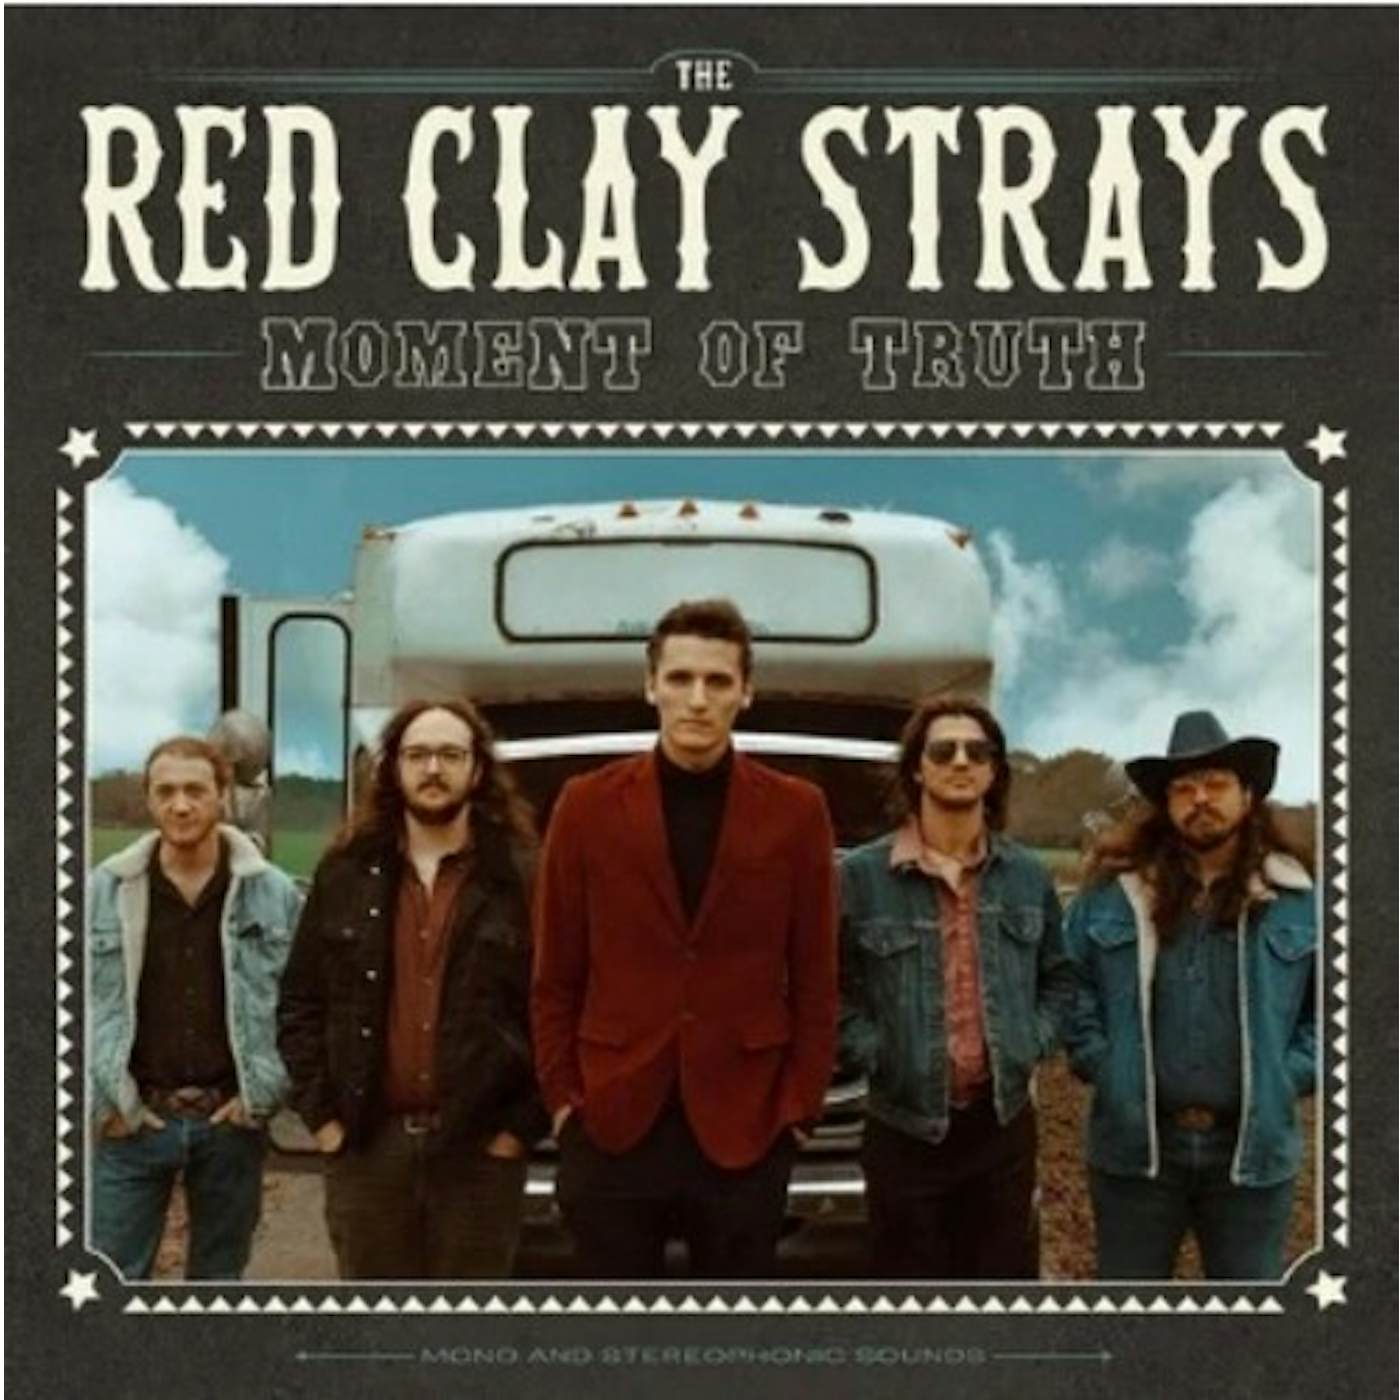 The Red Clay Strays MOMENT OF TRUTH CD